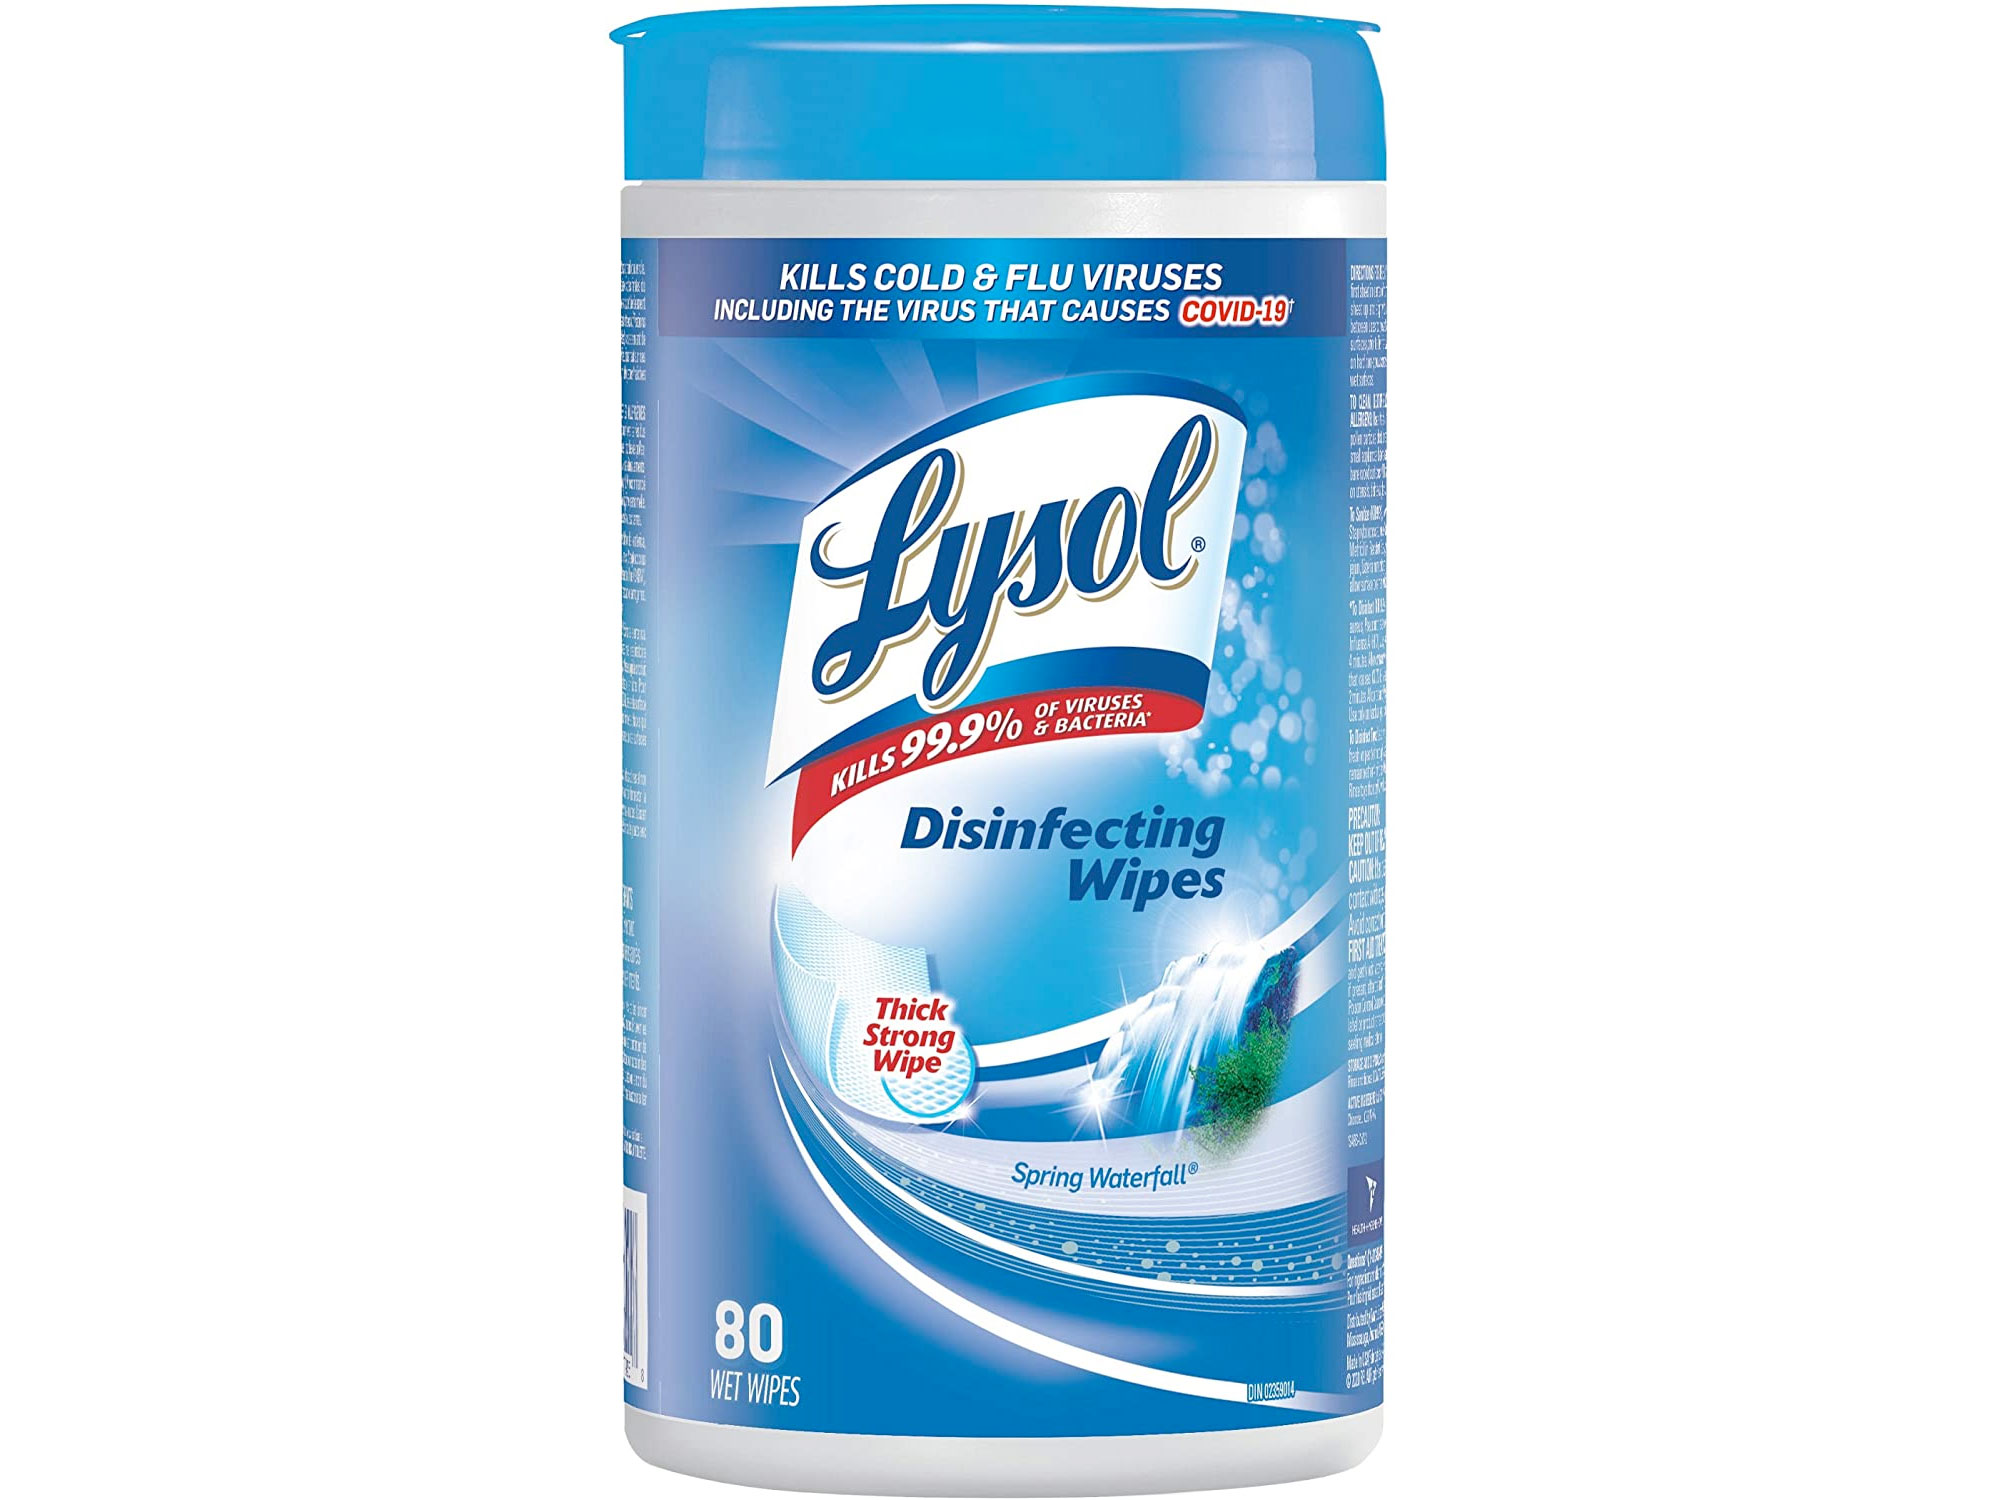 Amazon： Lysol Disinfecting Wipes (80 Wipes)只卖$4.99